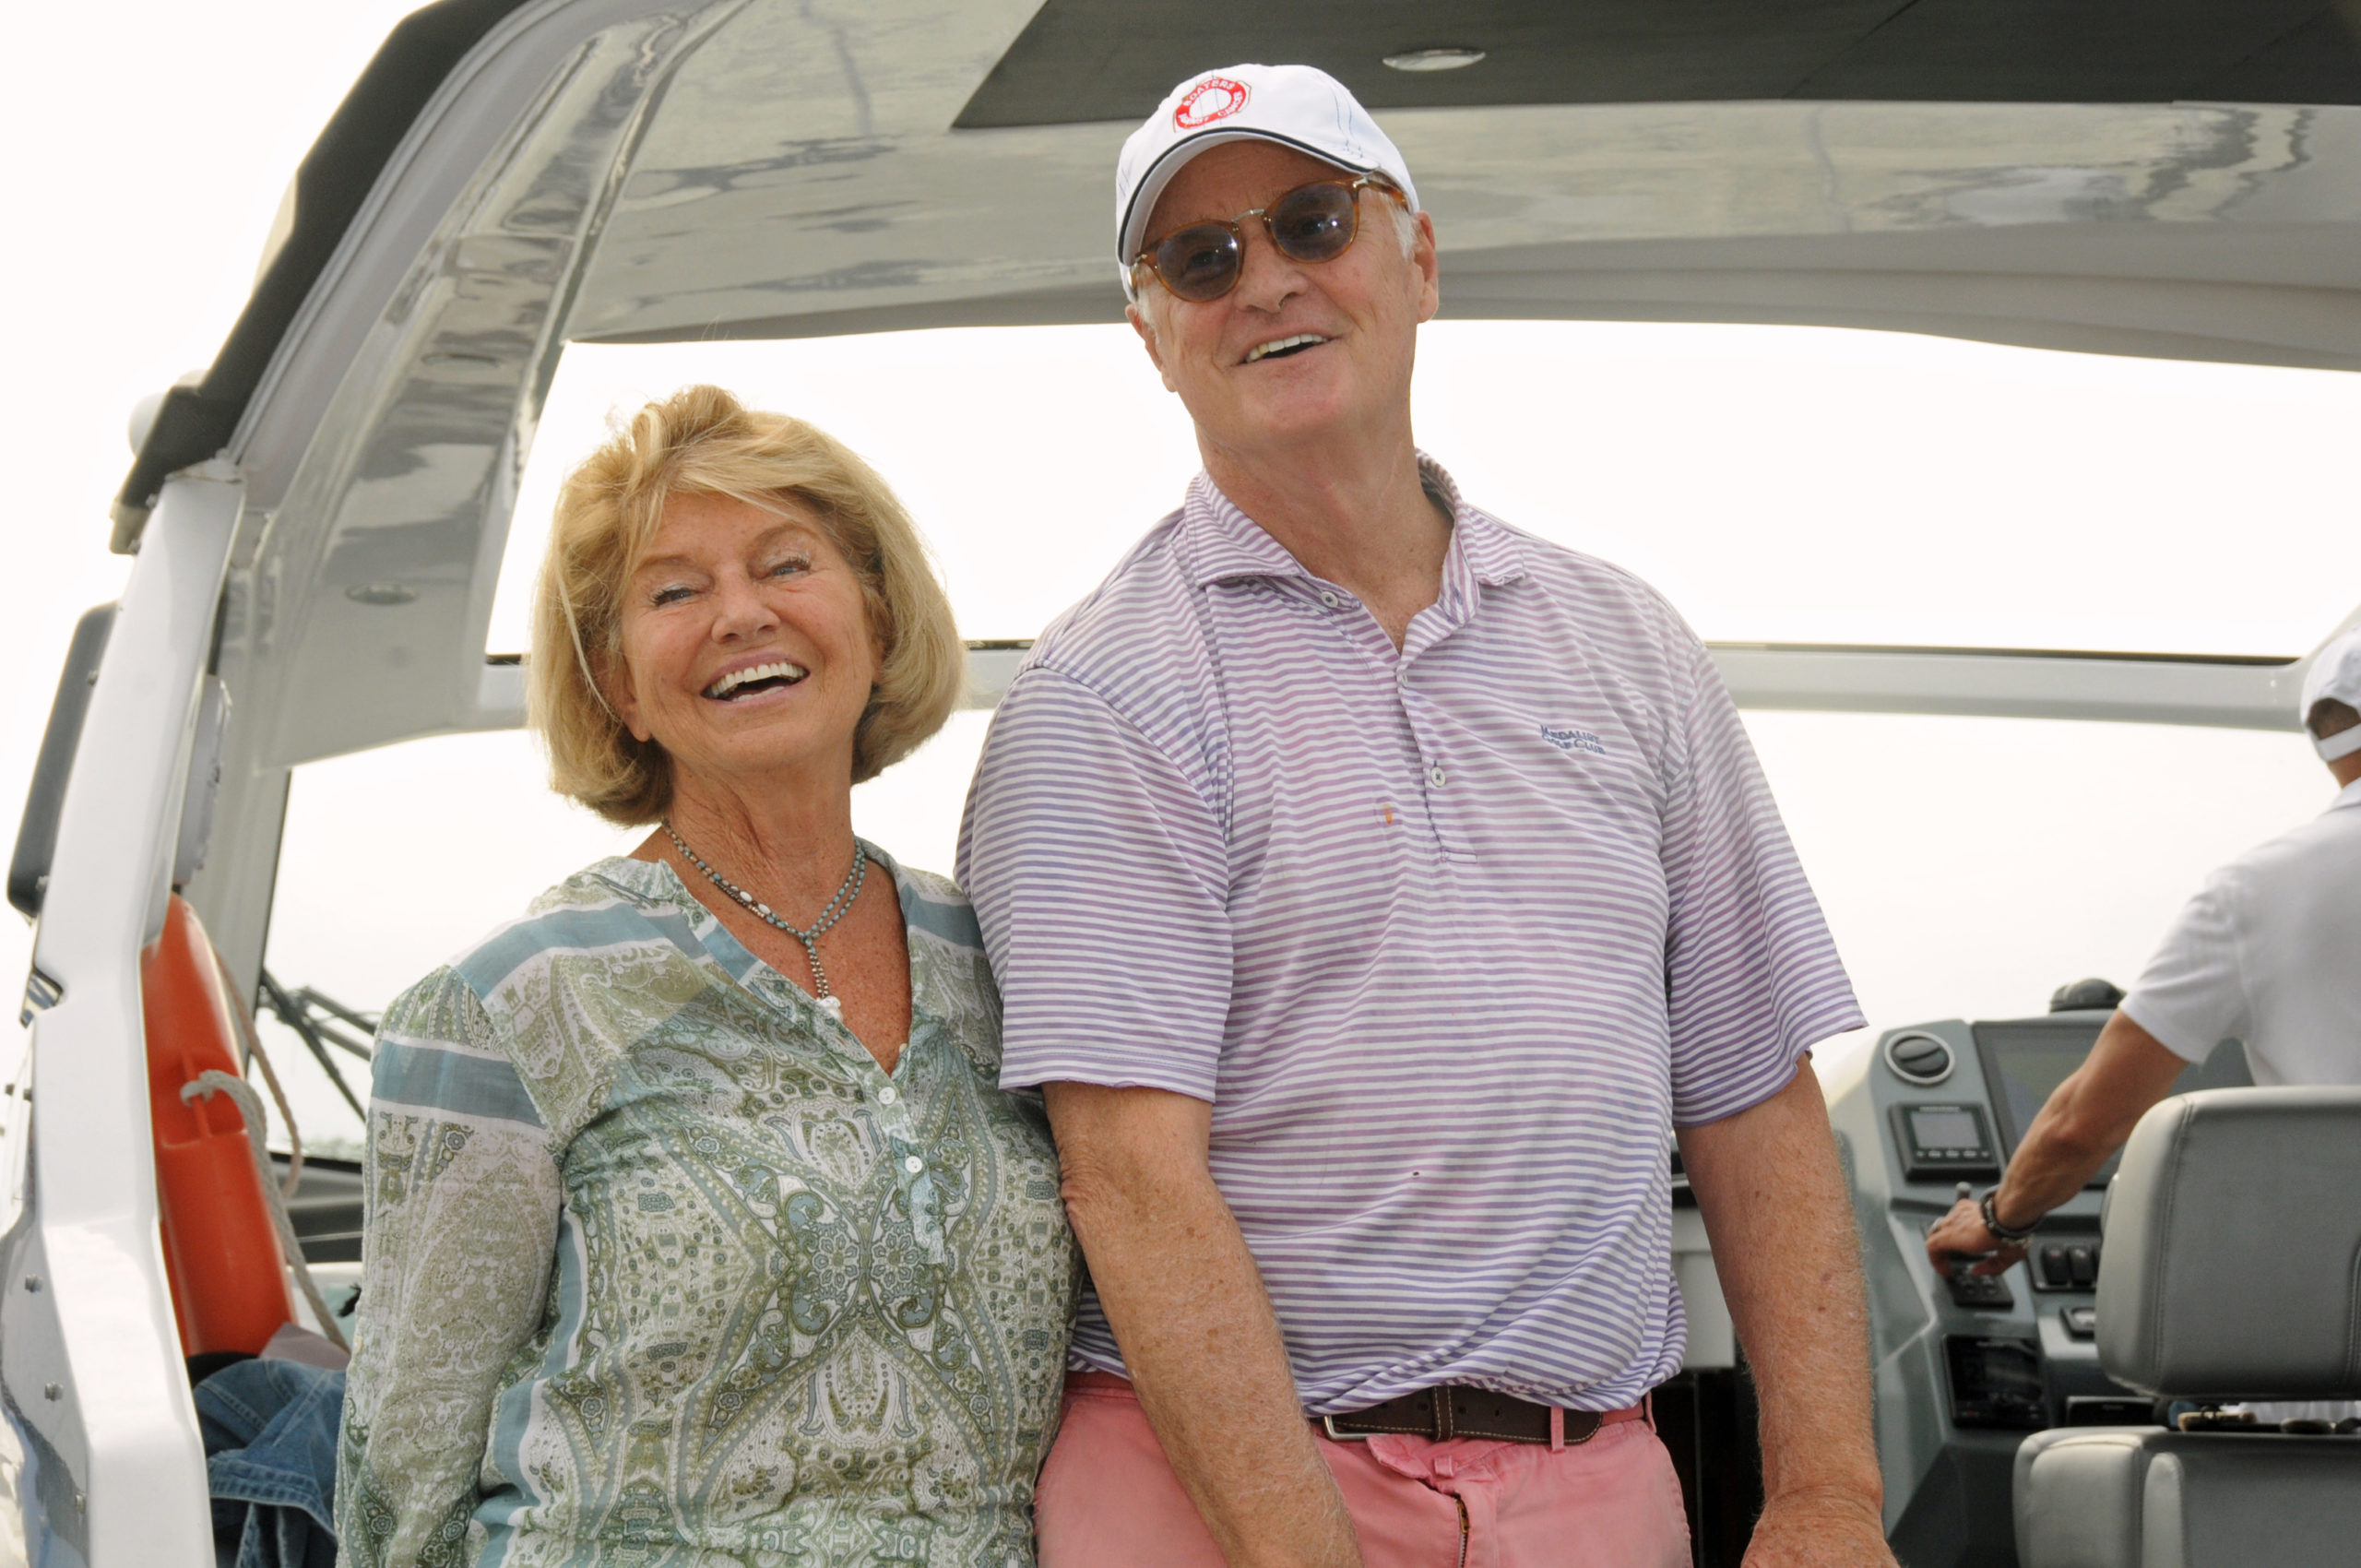 Wendy Moonan and Duncan Darrow at the 2021 Boaters Against Cancer  fundraiser,  a sunset cruise from Long Wharf to Dering Harbor and back to benefit Fighting Chance, on Sunday evening.   RICHARD LEWIN